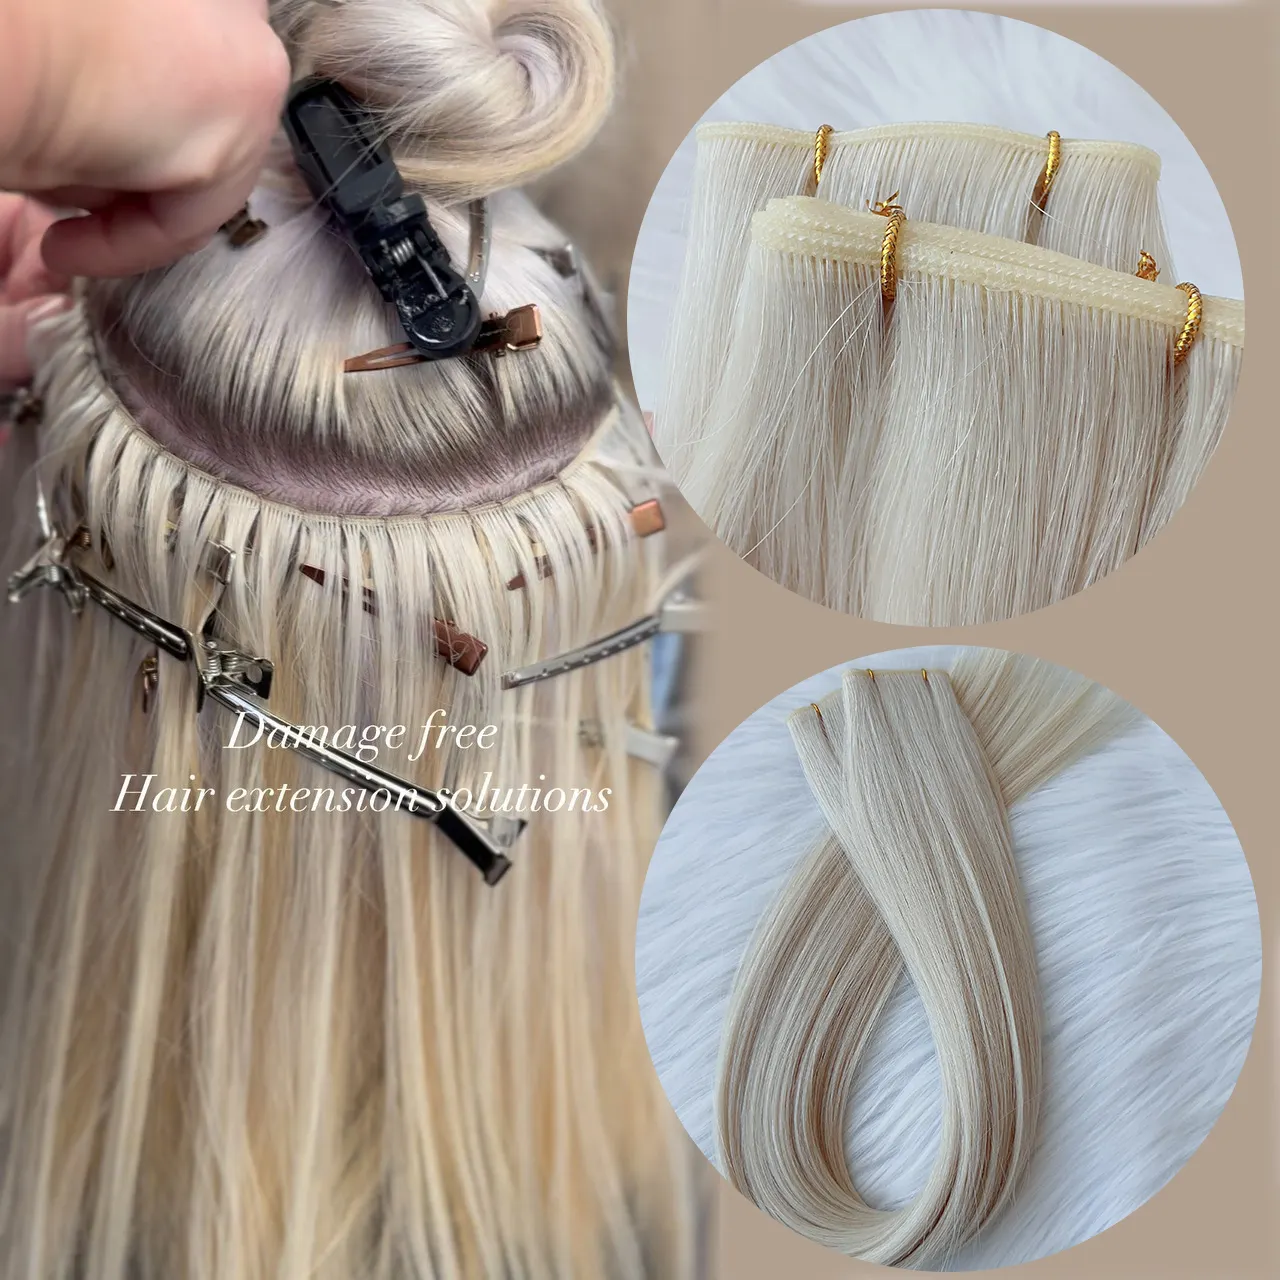 Wholesale Stock 12A 22 Inch Long Raw Double Drawn Virgin Unprocessed Russian Hand Tied Blond Genius Weft Human Hair Extensions